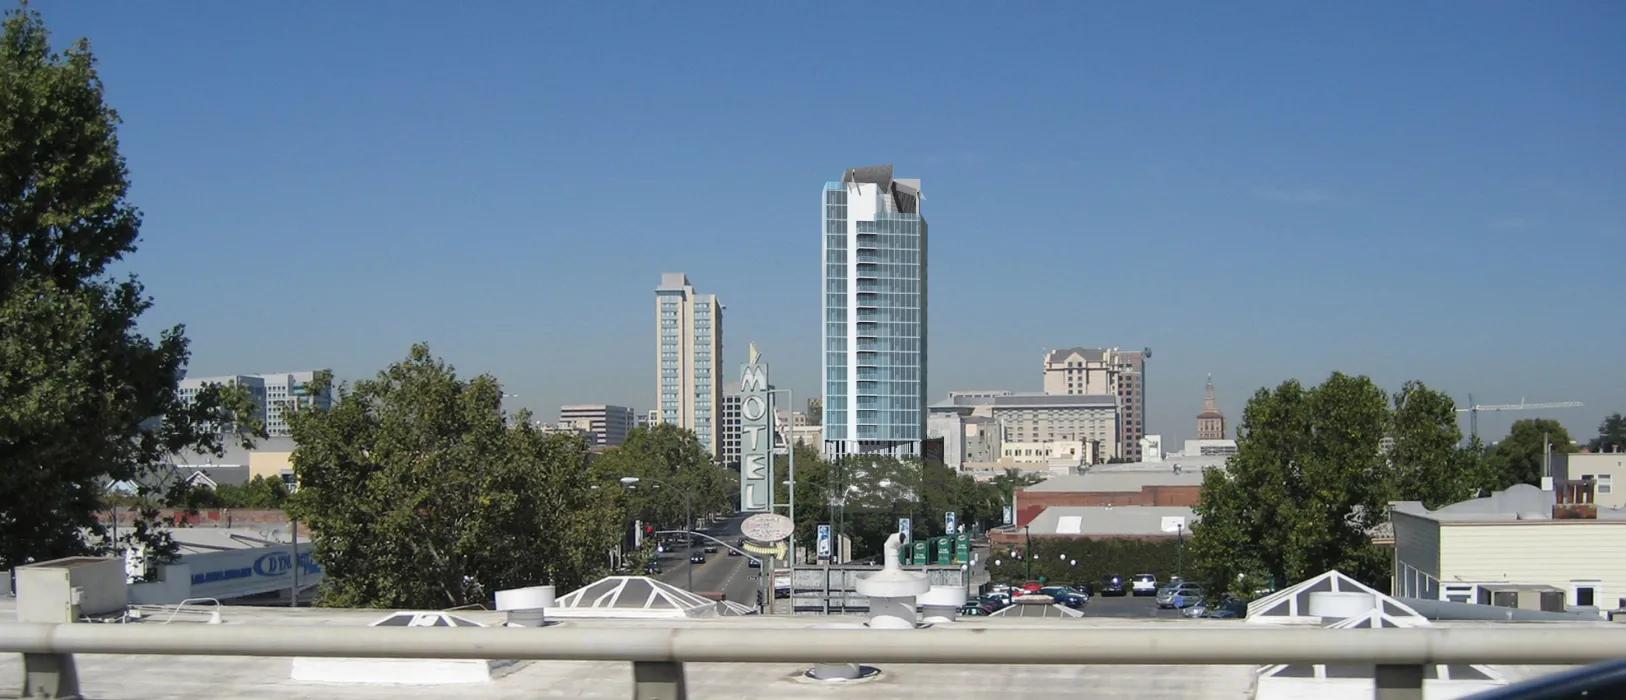 Image of the skyline with a rendered Market Gateway Tower inserted.